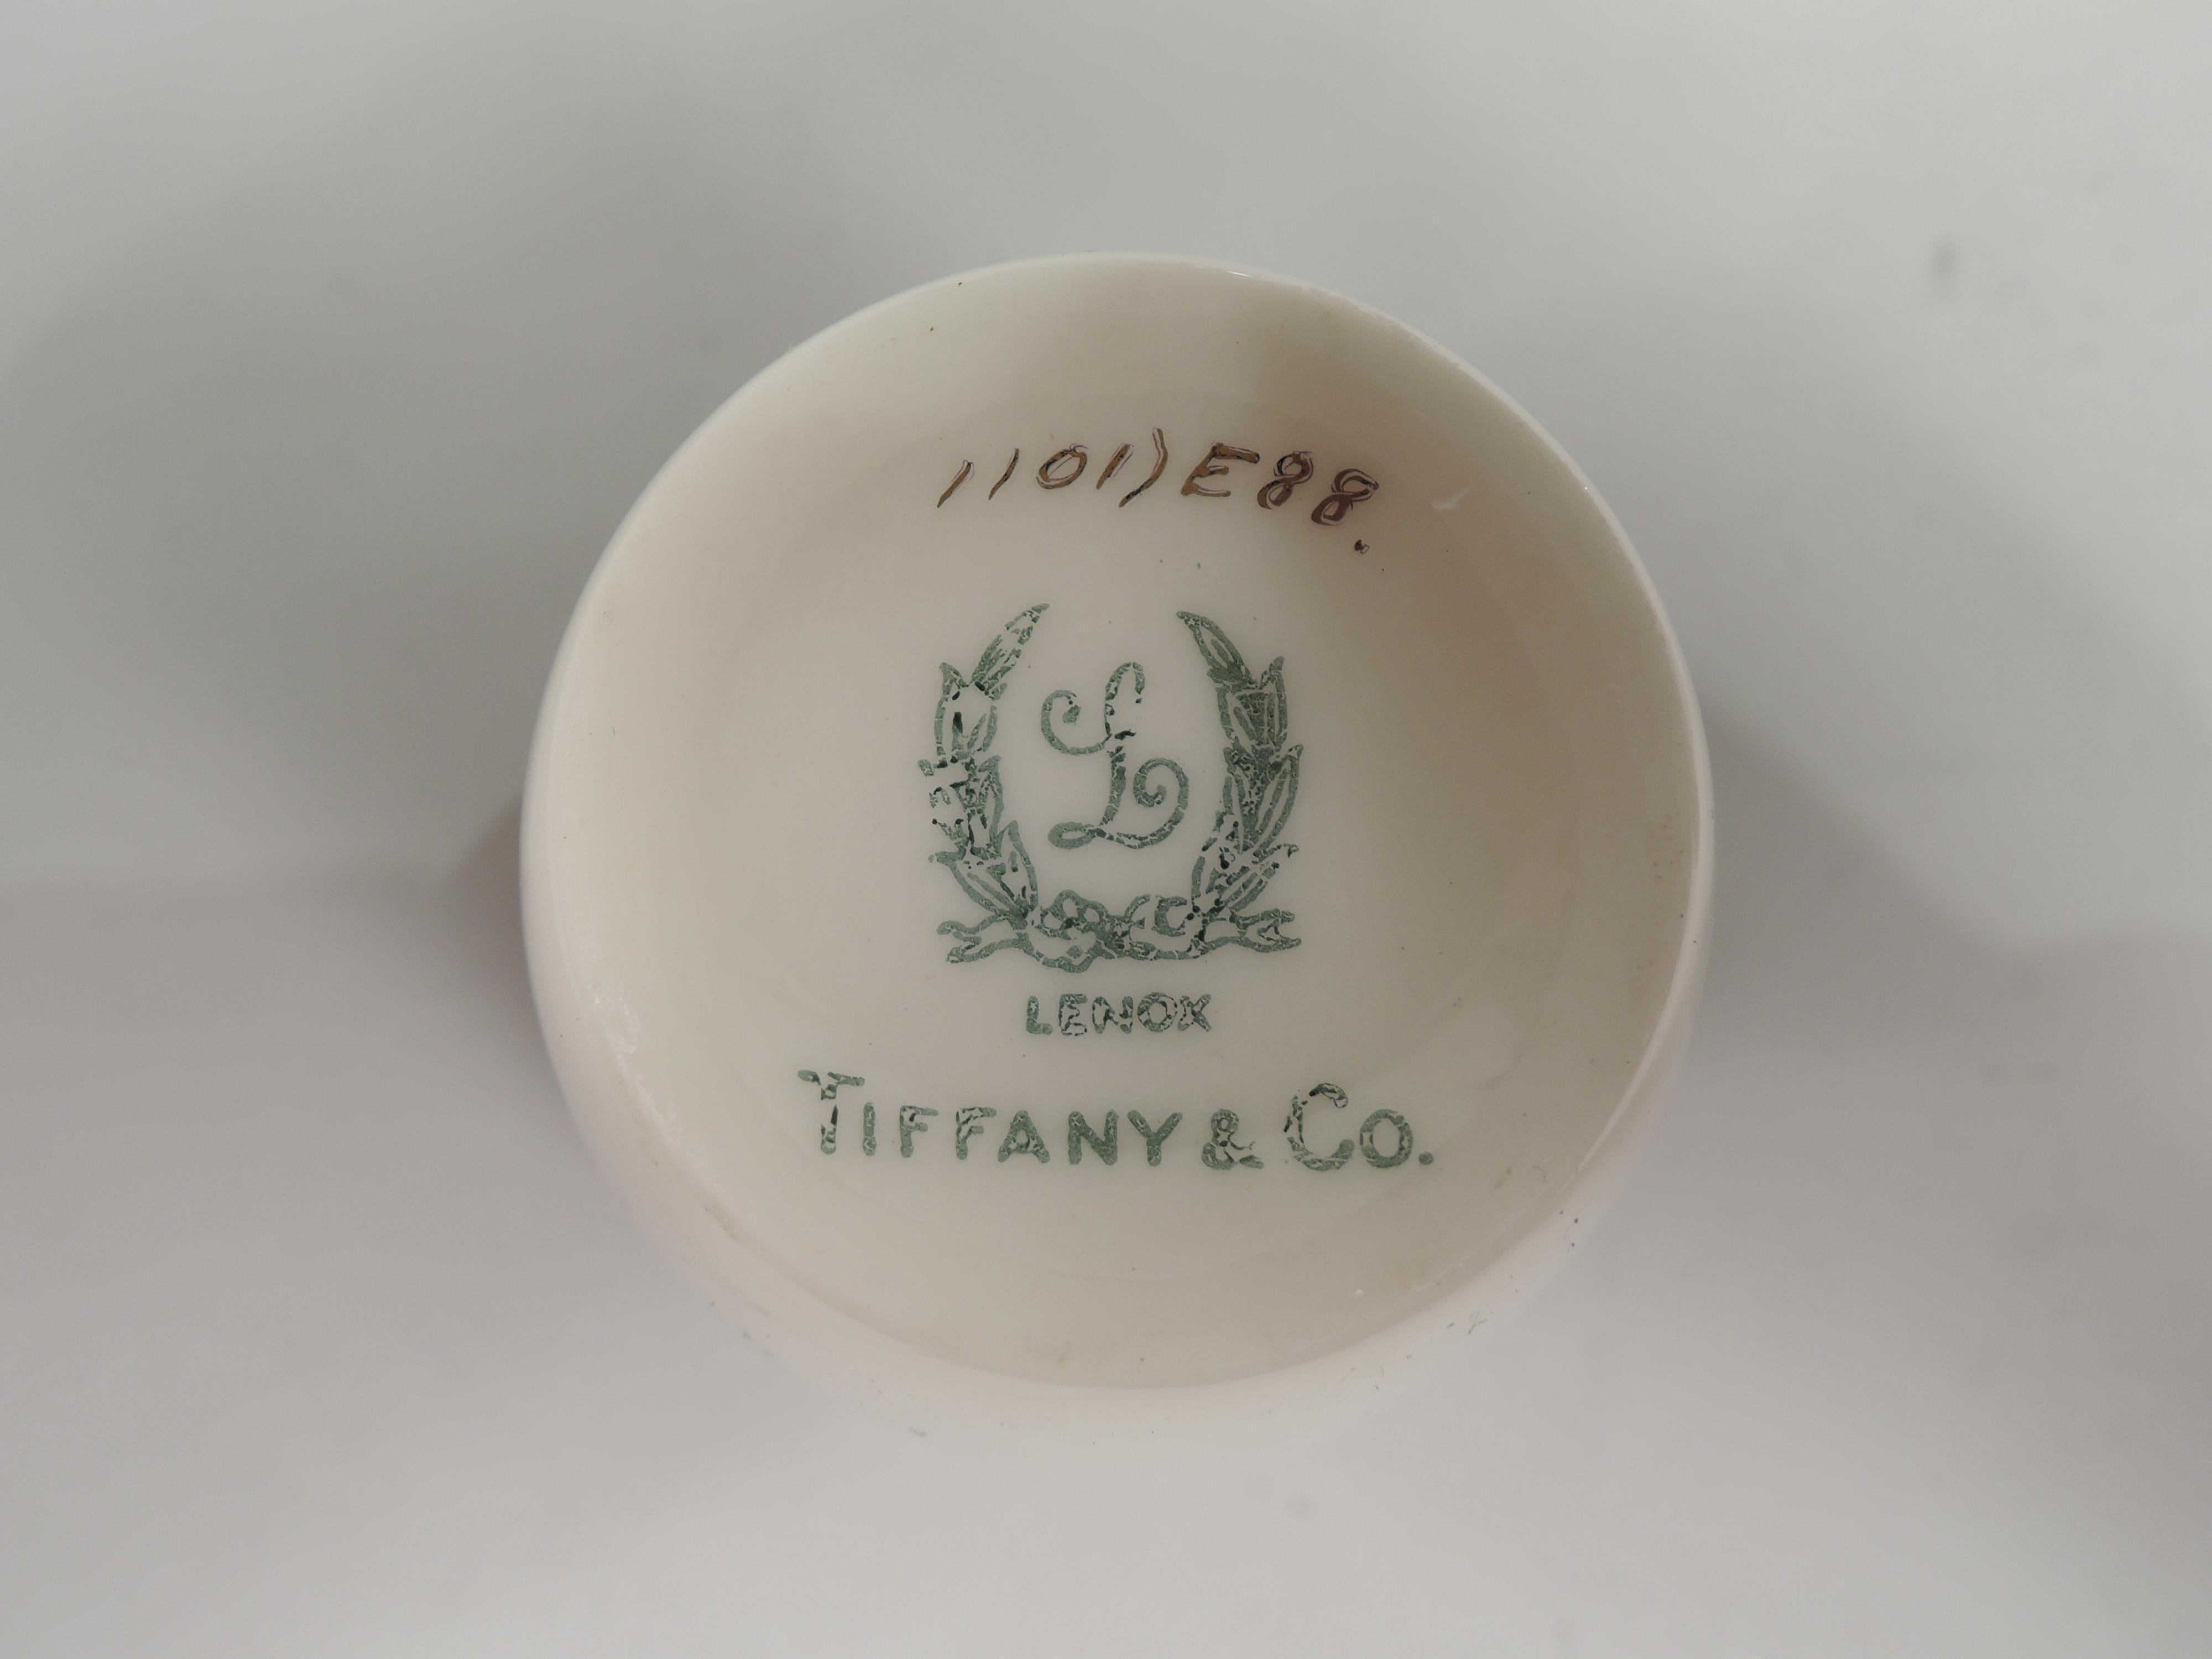 Set of 6 Tiffany Edwardian Regency Demitasse Holders & Lenox Liners In Excellent Condition For Sale In New York, NY